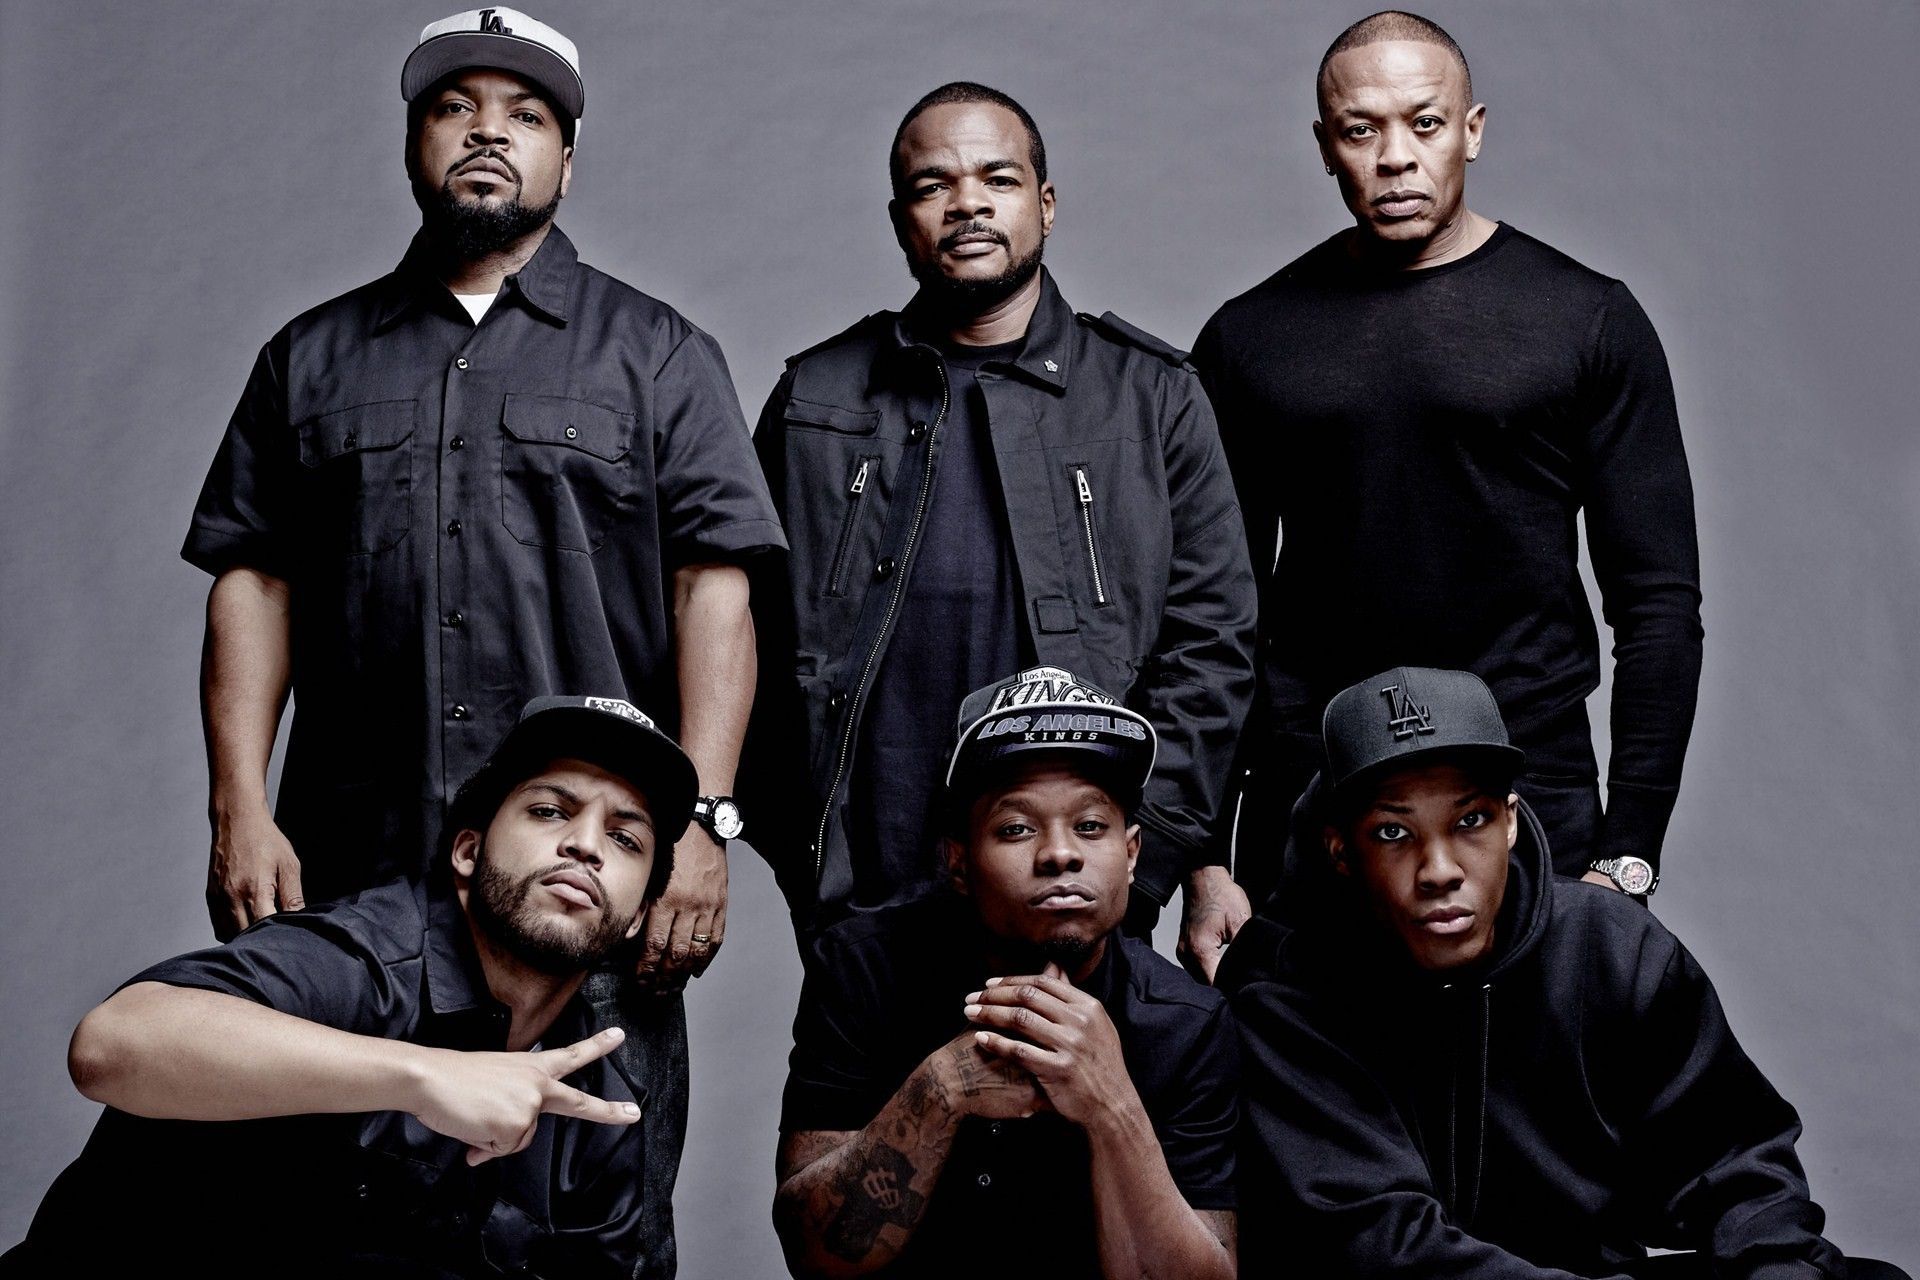 STRAIGHT OUTTA COMPTON SCREENING + AFTERPARTY | The Panic Room Read